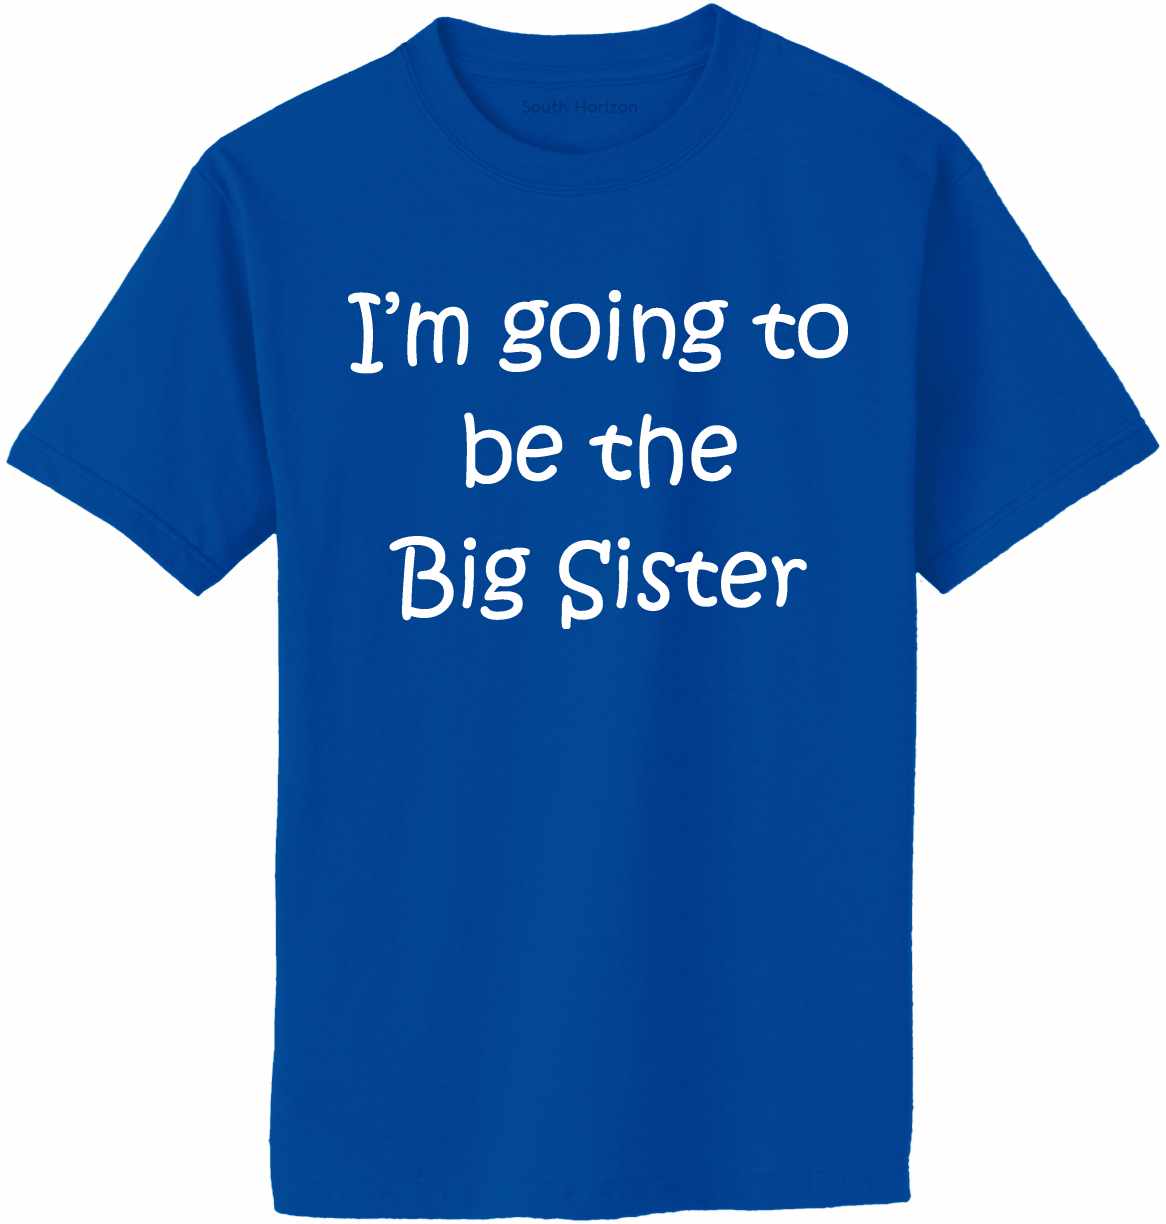 I'M GOING TO BE THE BIG SISTER Adult T-Shirt (#578-1)